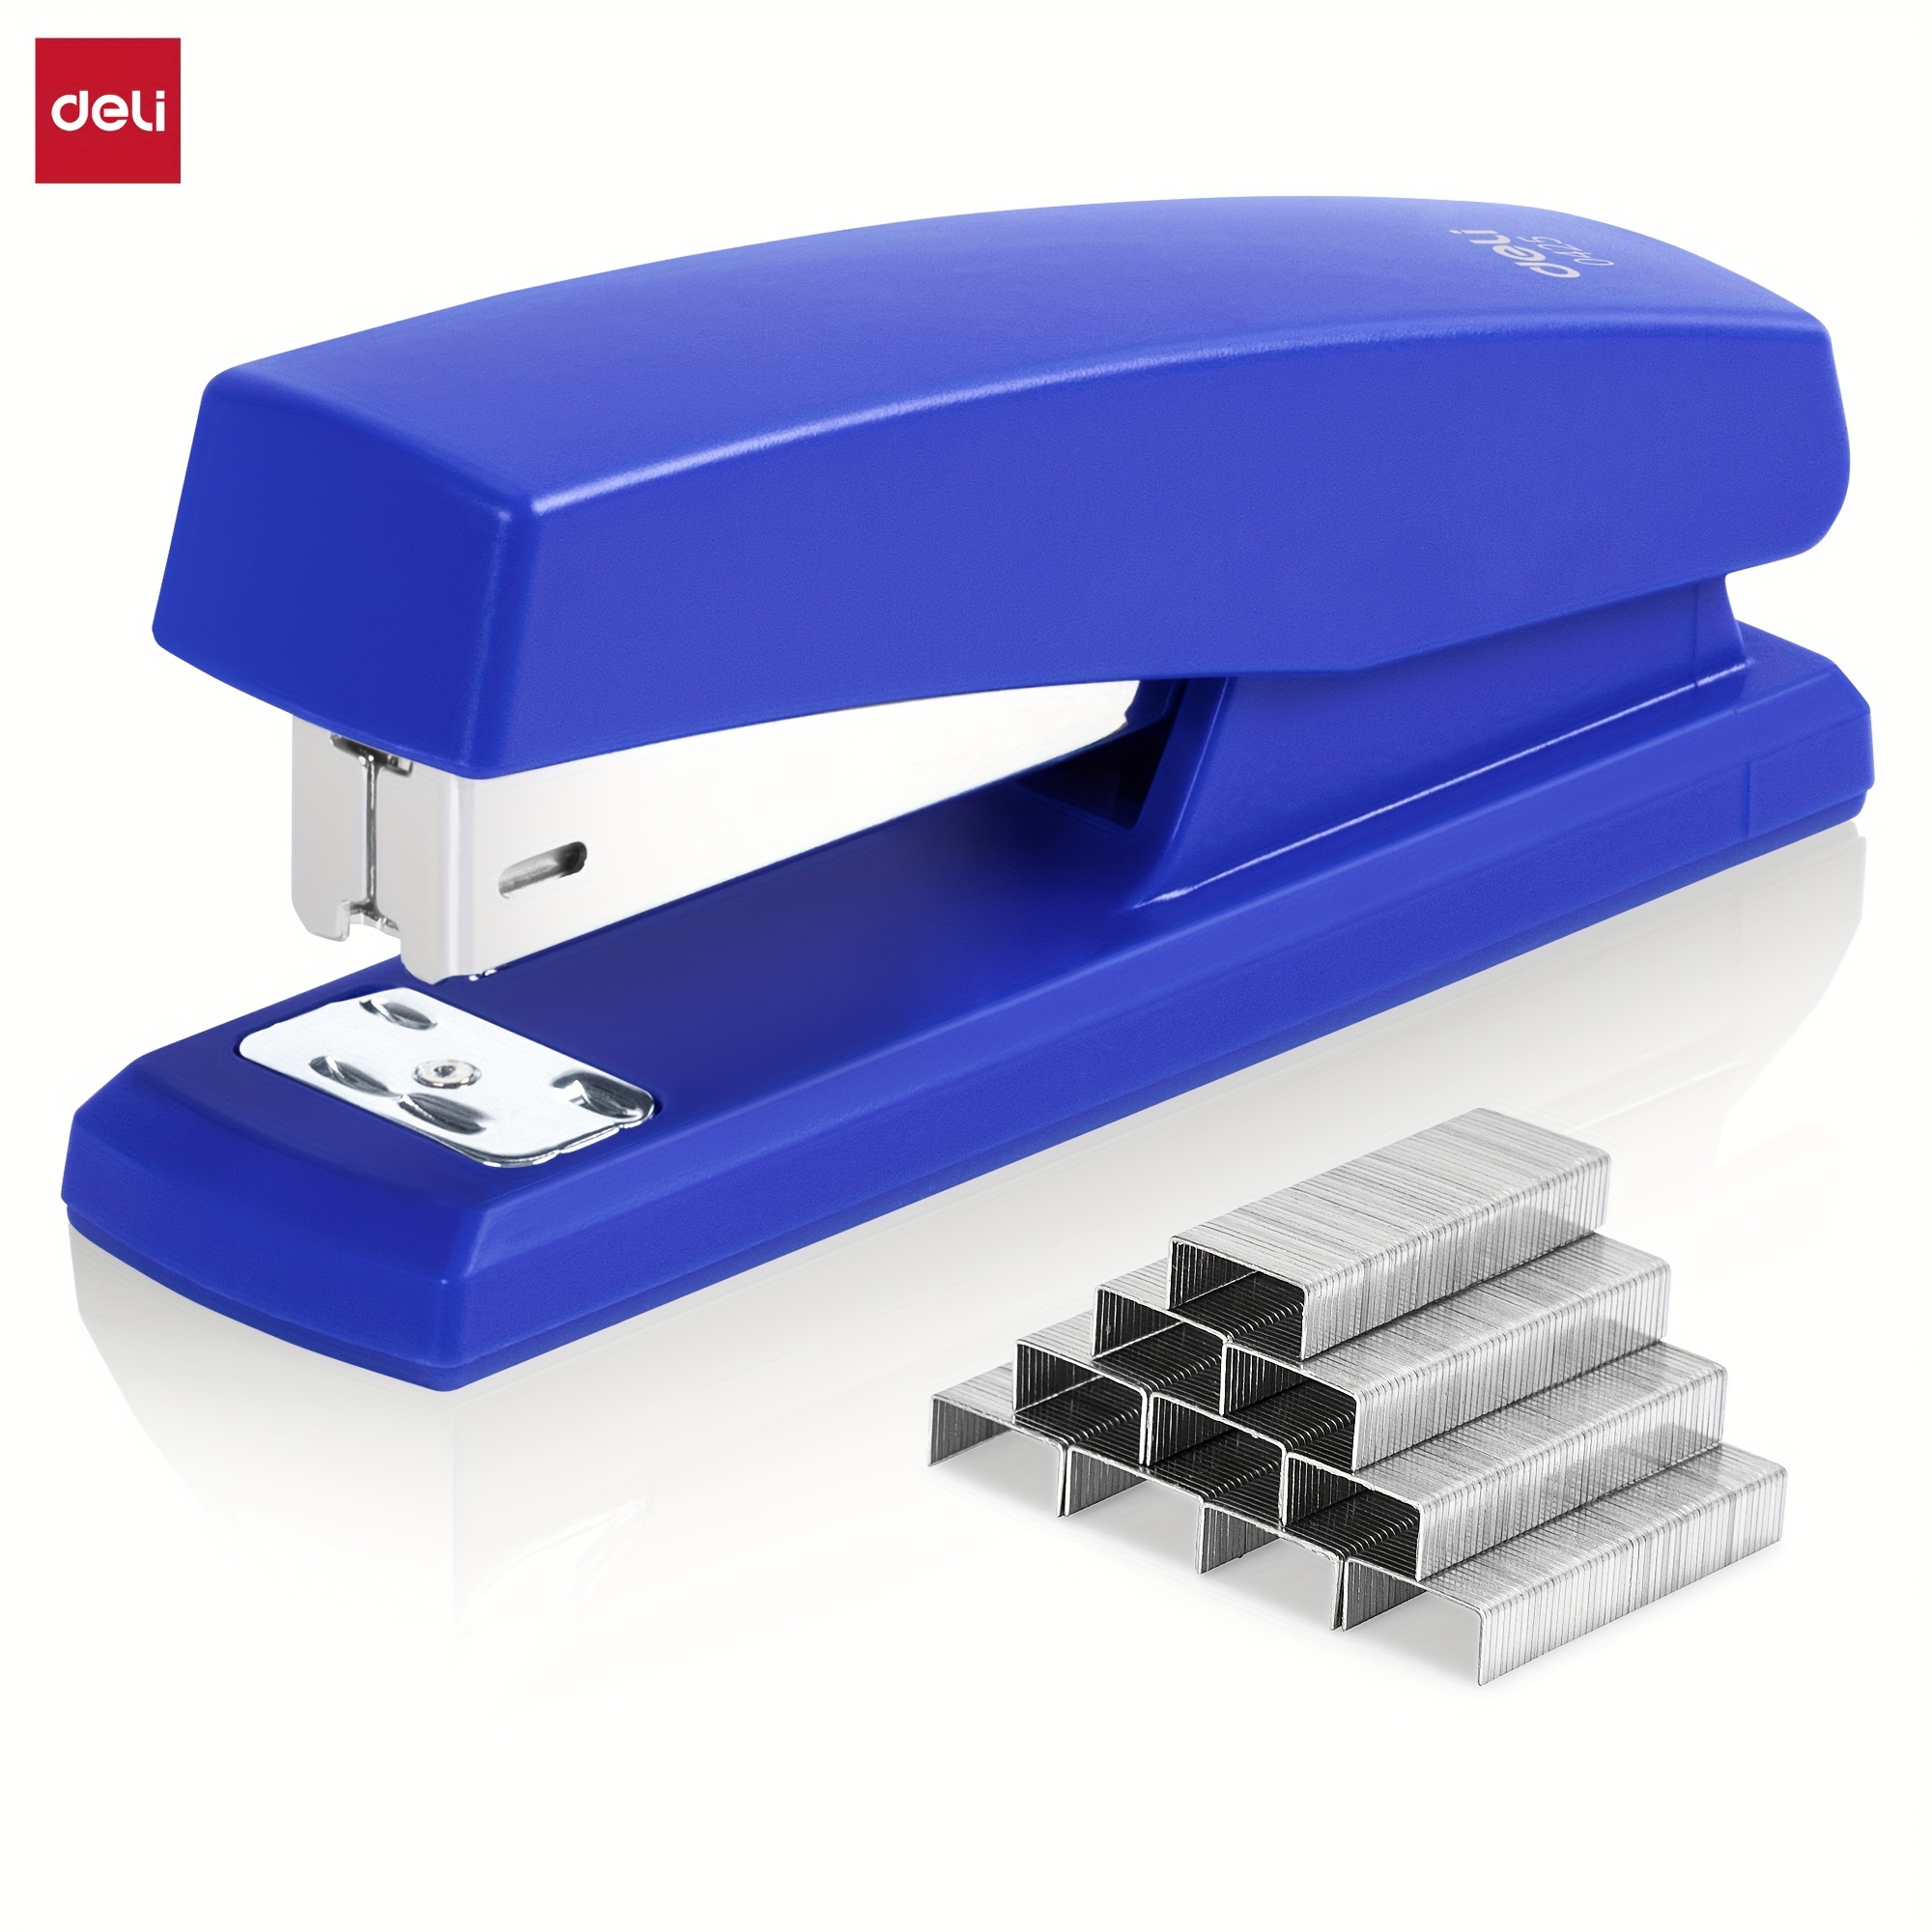 

20sheets Stapler Set, Low Stapler Indicator, Non-skid Rubber Base, Office And Students